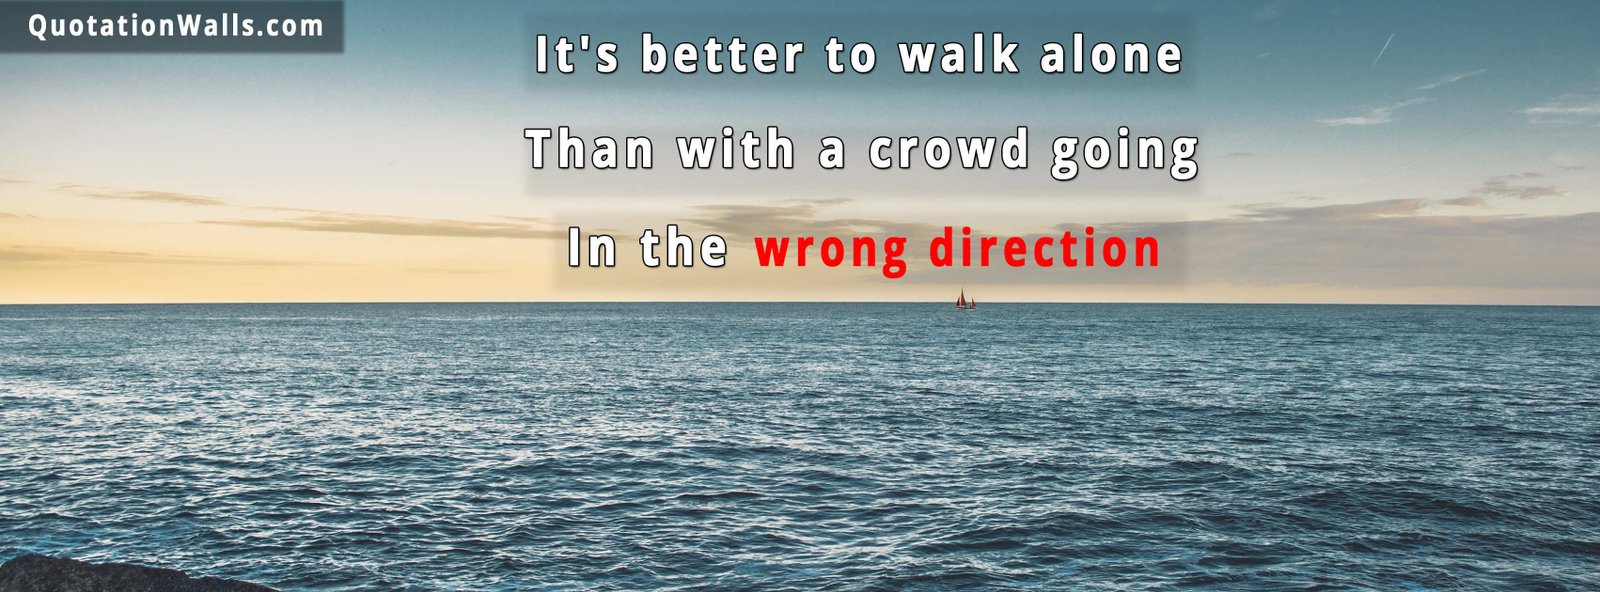 Better To Walk Alone Motivational Facebook Cover Photo ...